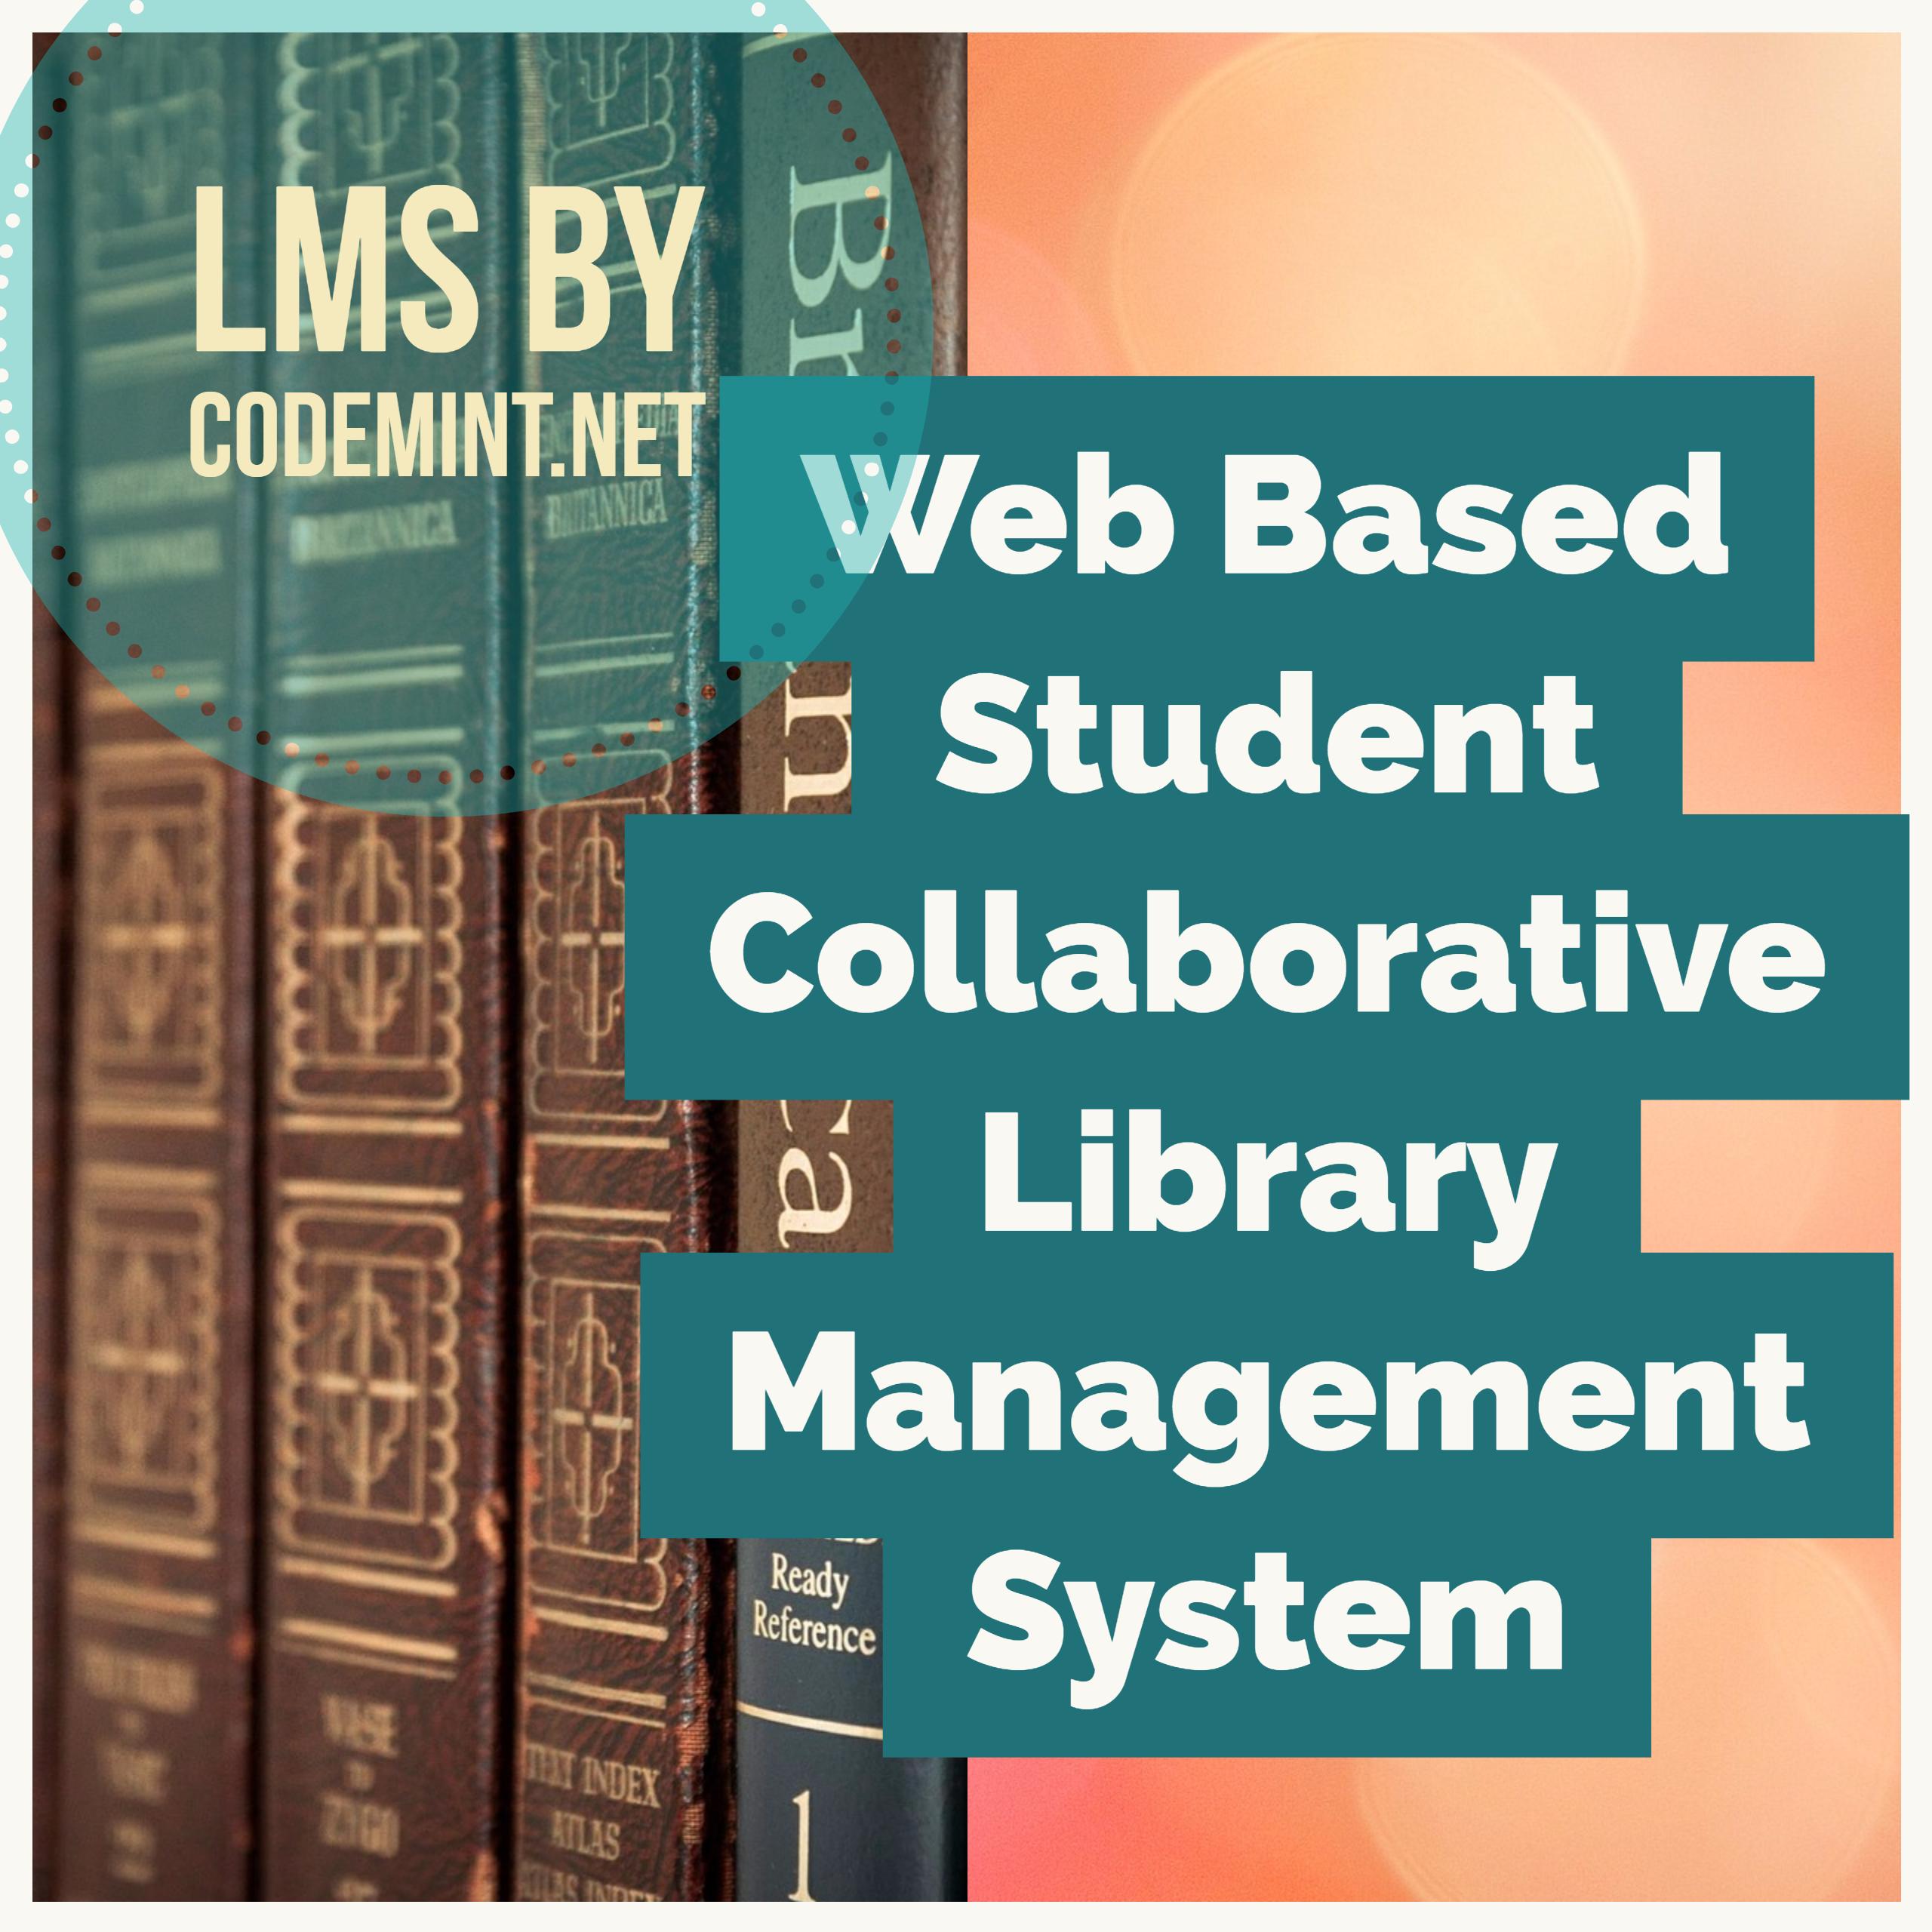 LMS - Web Based Student Collaborative Library Management System